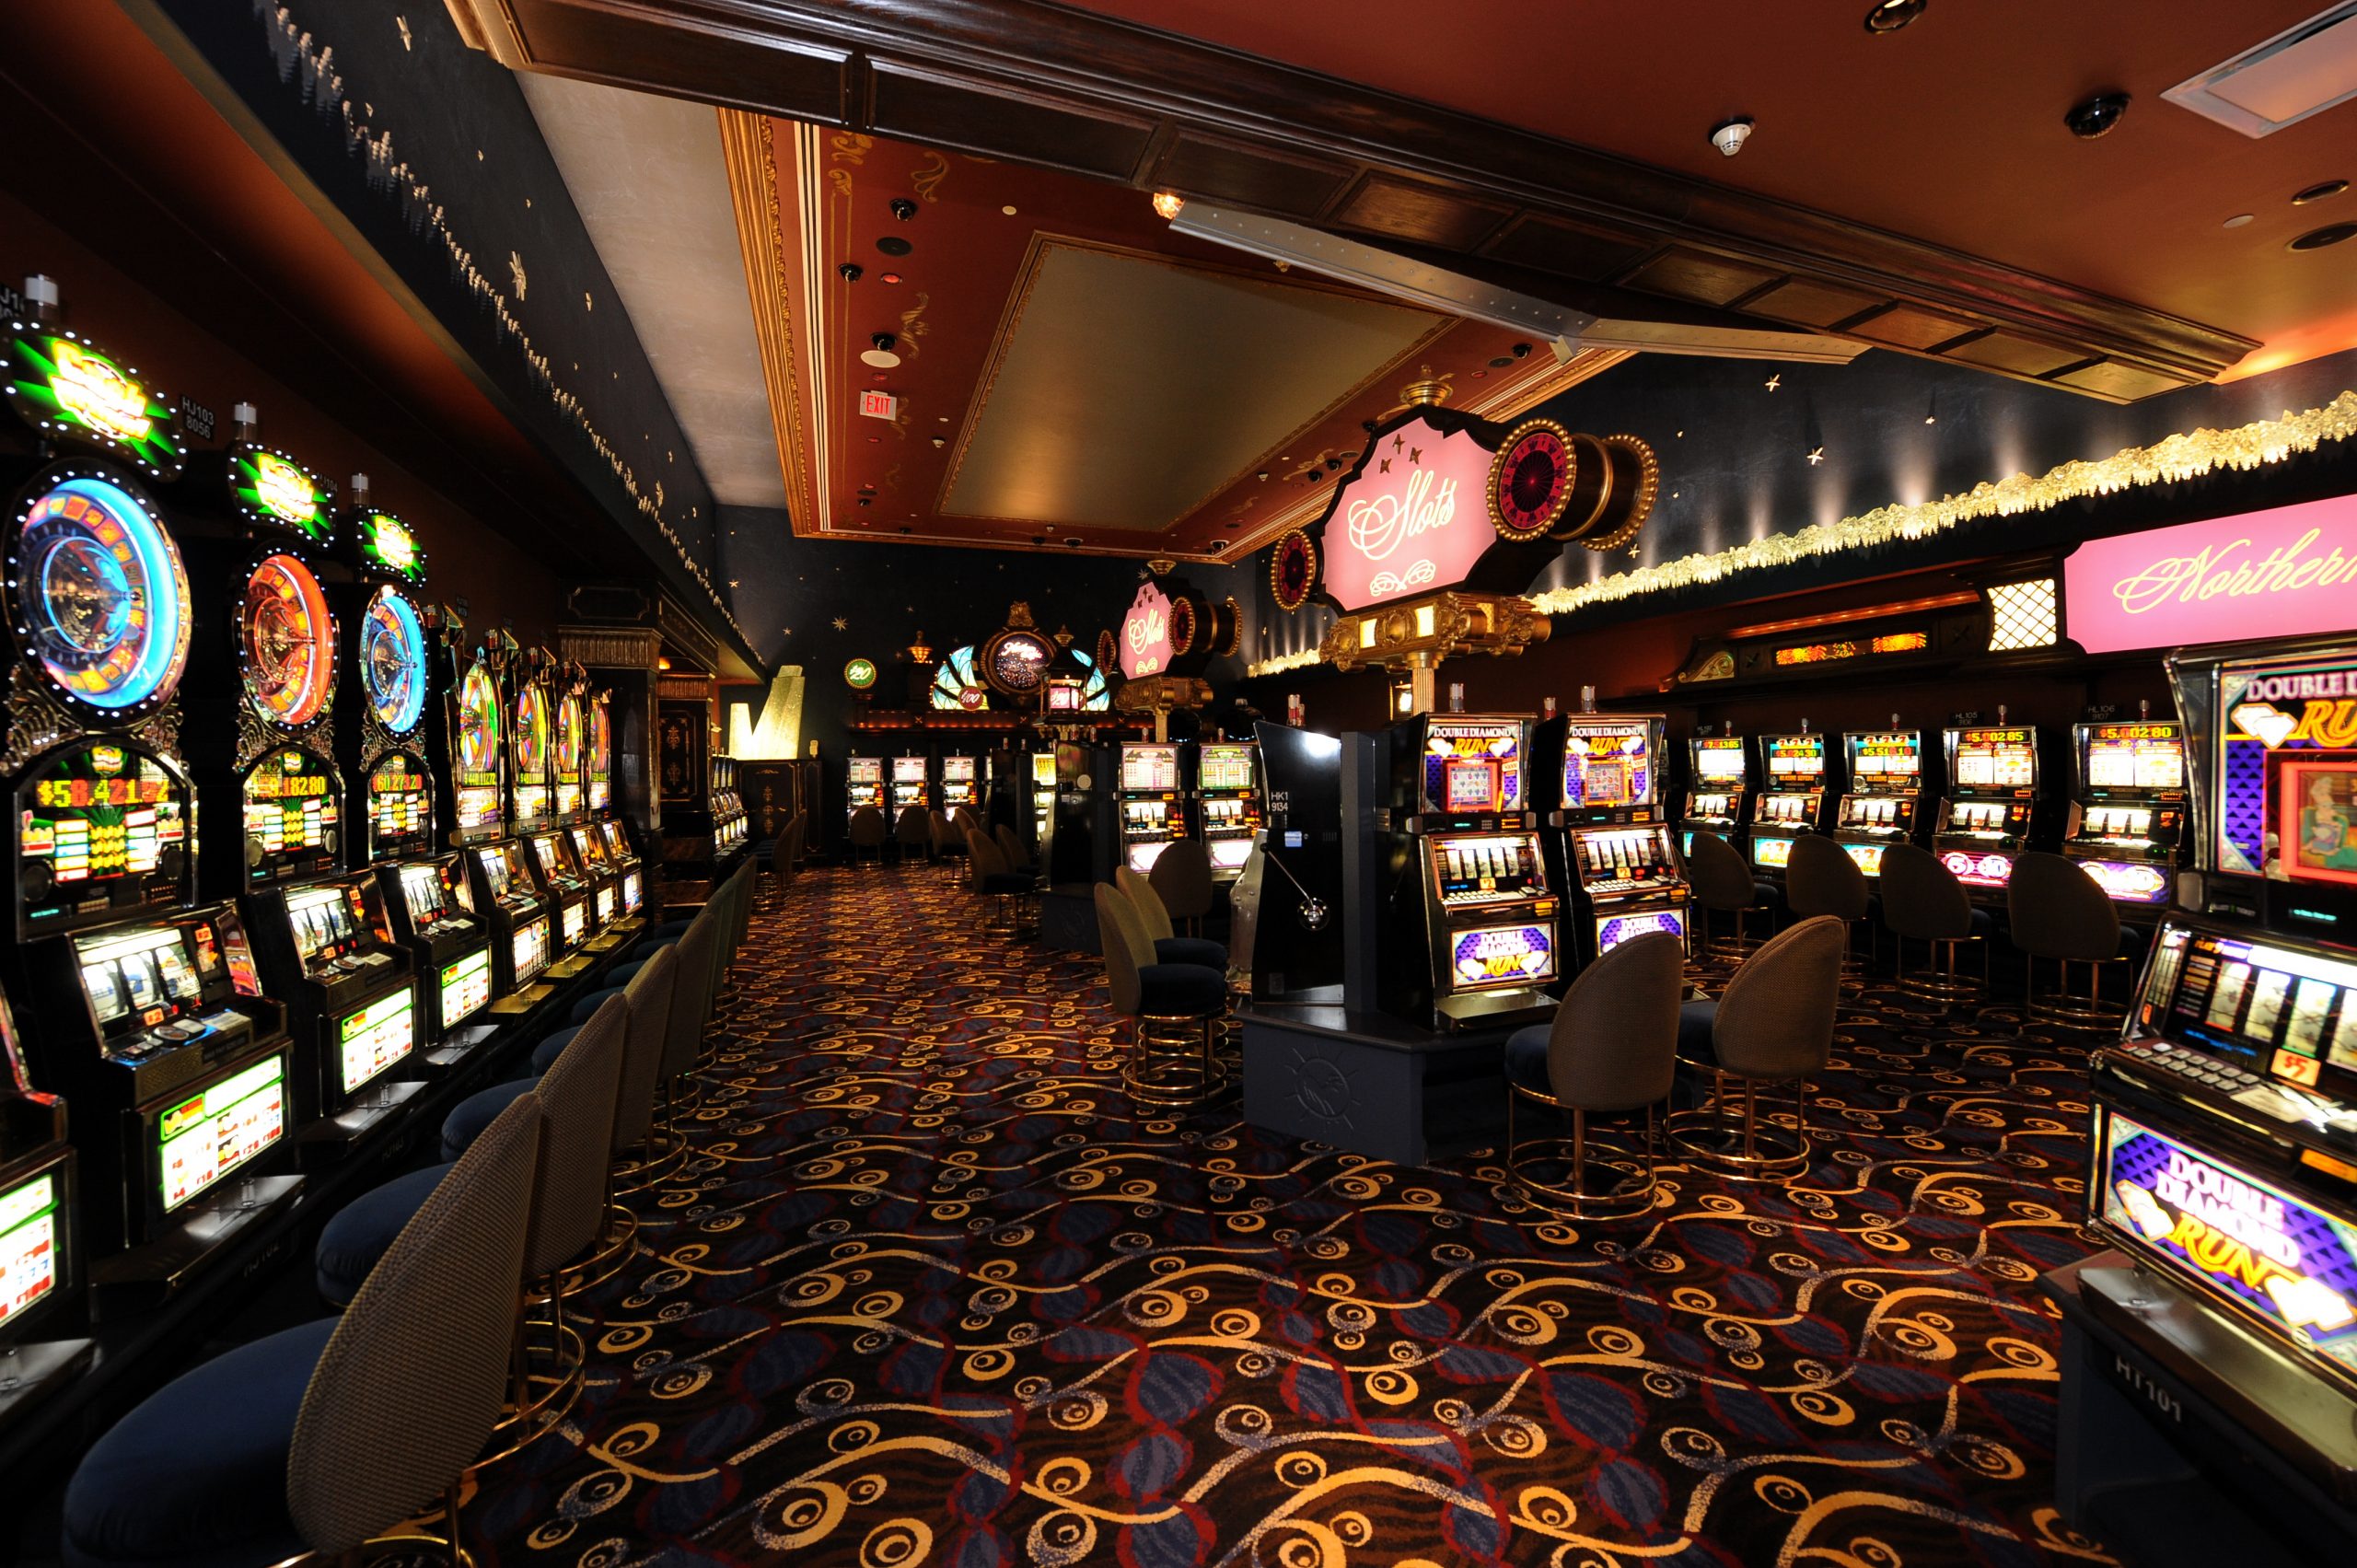 Benefits Of Playing Online Slots From Home